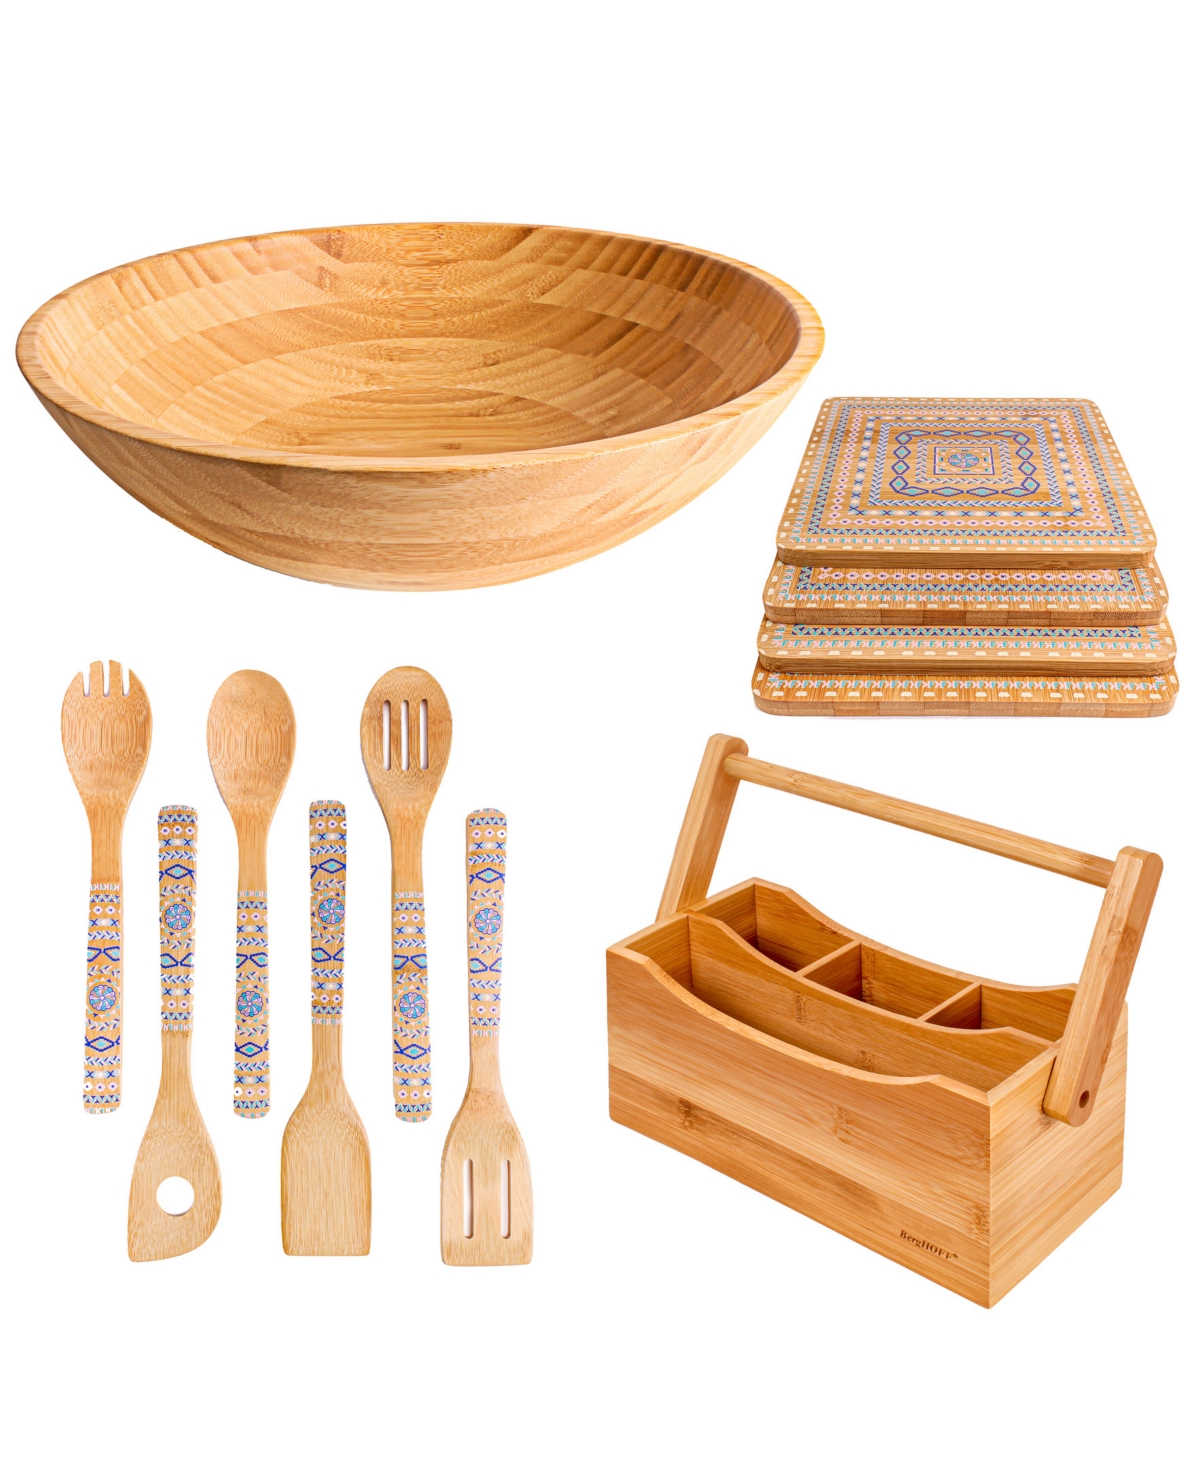 Berghoff Bamboo 12 Piece Party And Entertaining Set In Natural